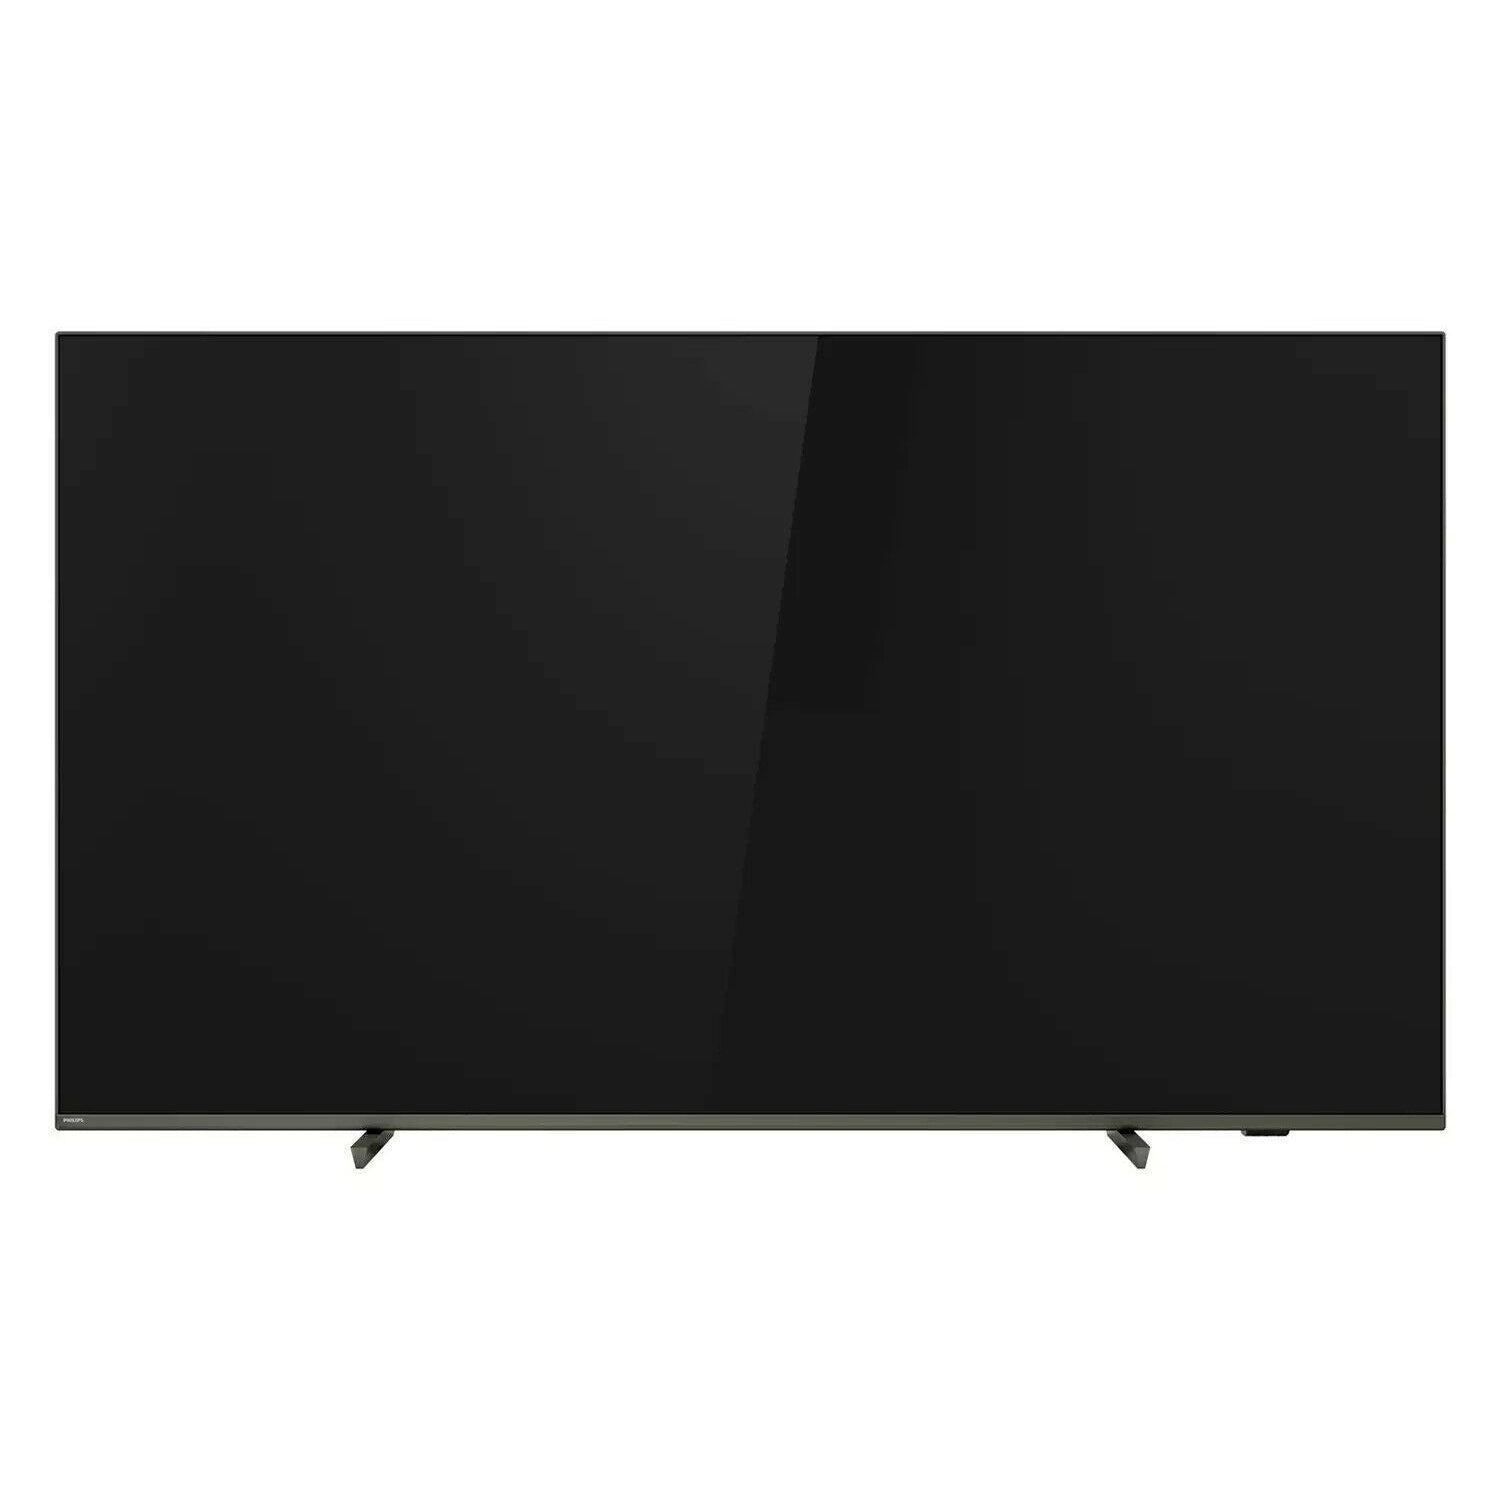 Philips 50 Inch 50PUS8106 Smart 4K UHD HDR LED Ambilight TV *No Stand*